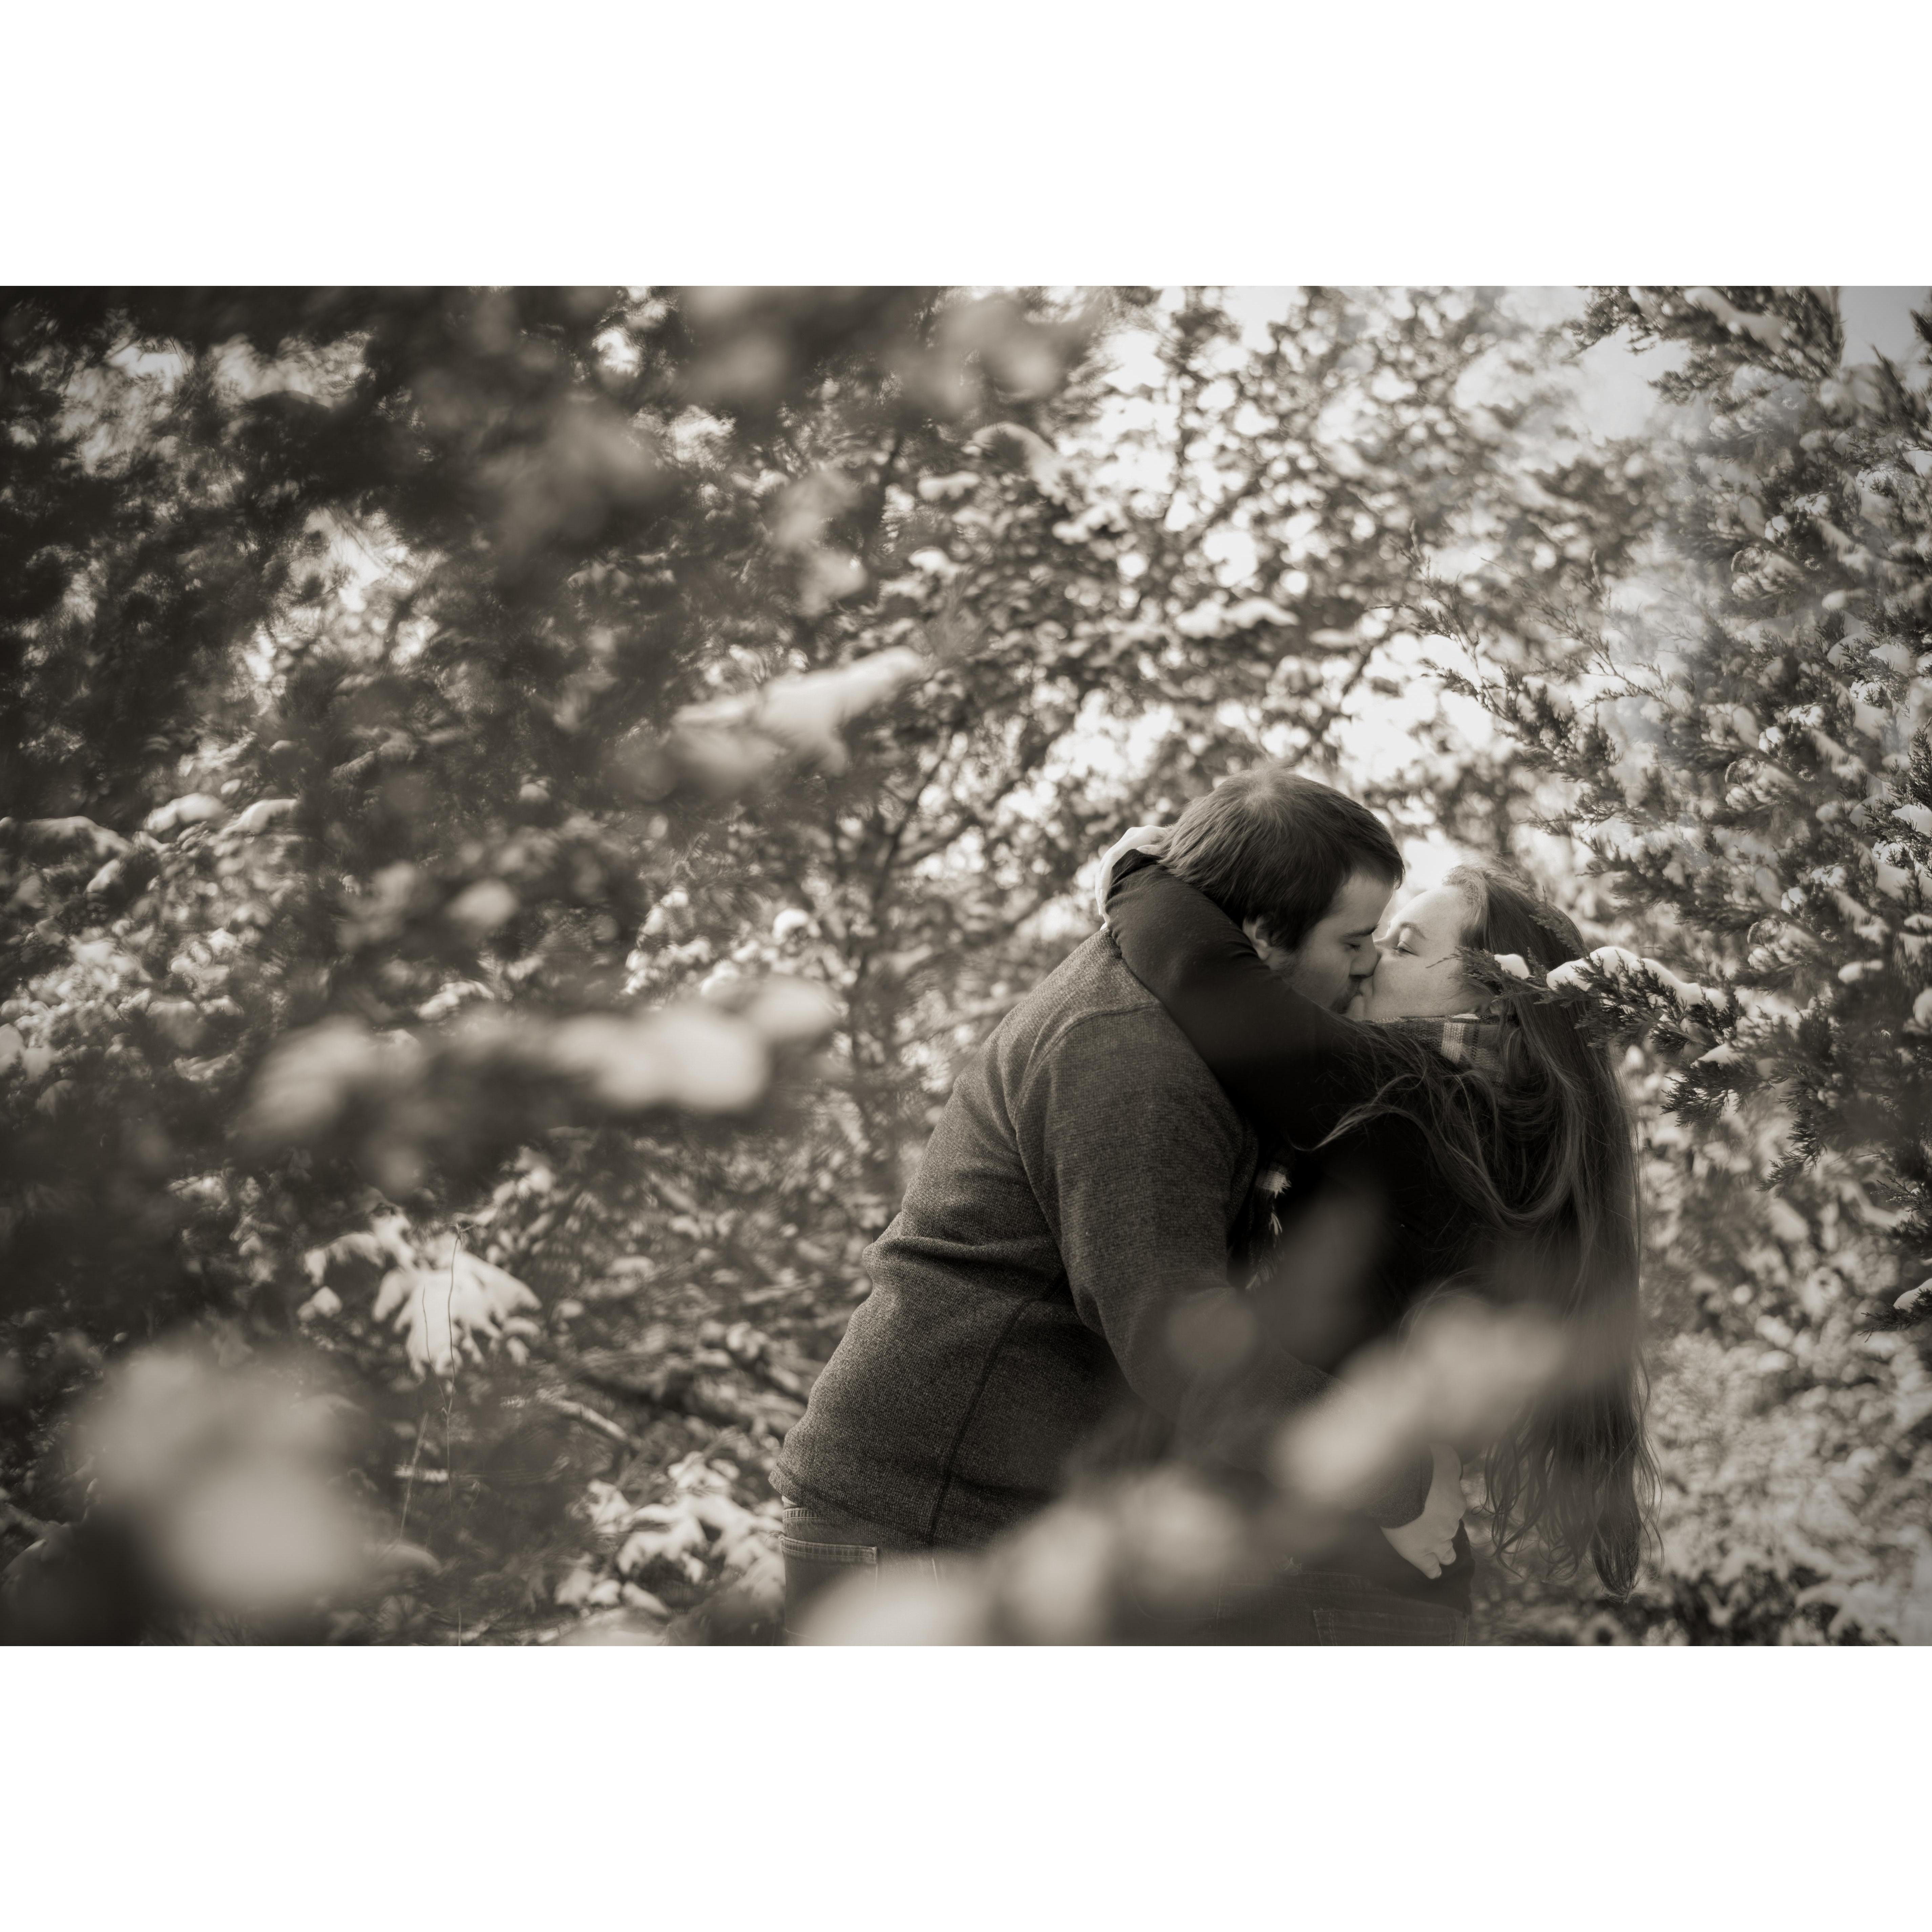 Some of our engagement pictures 
Captured by Kaitlynn Sallee Photography